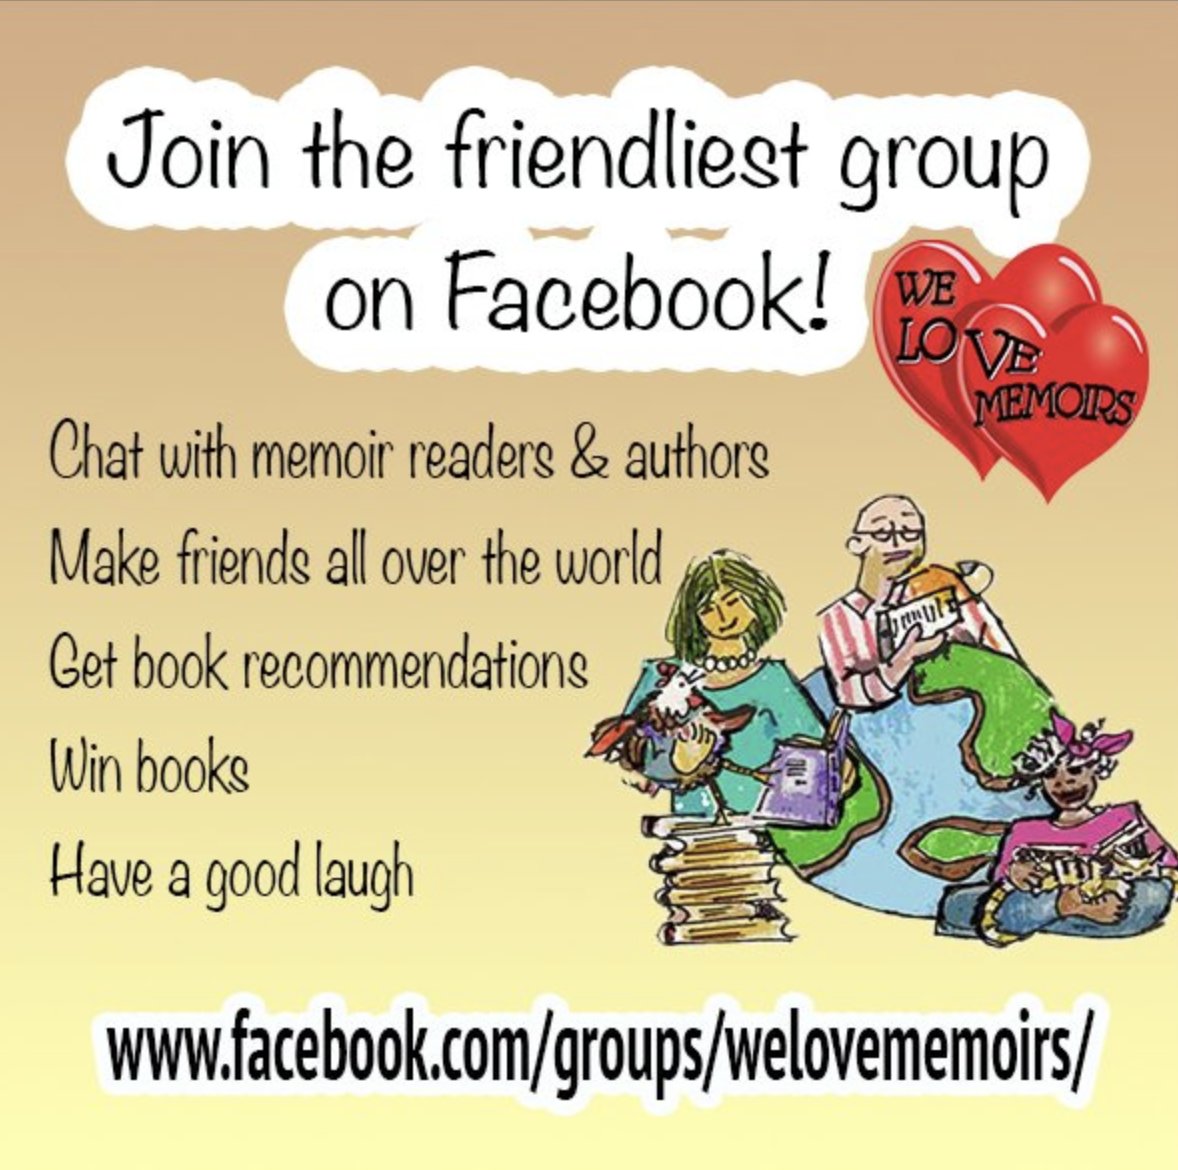 If you love reading or writing memoirs, join us!